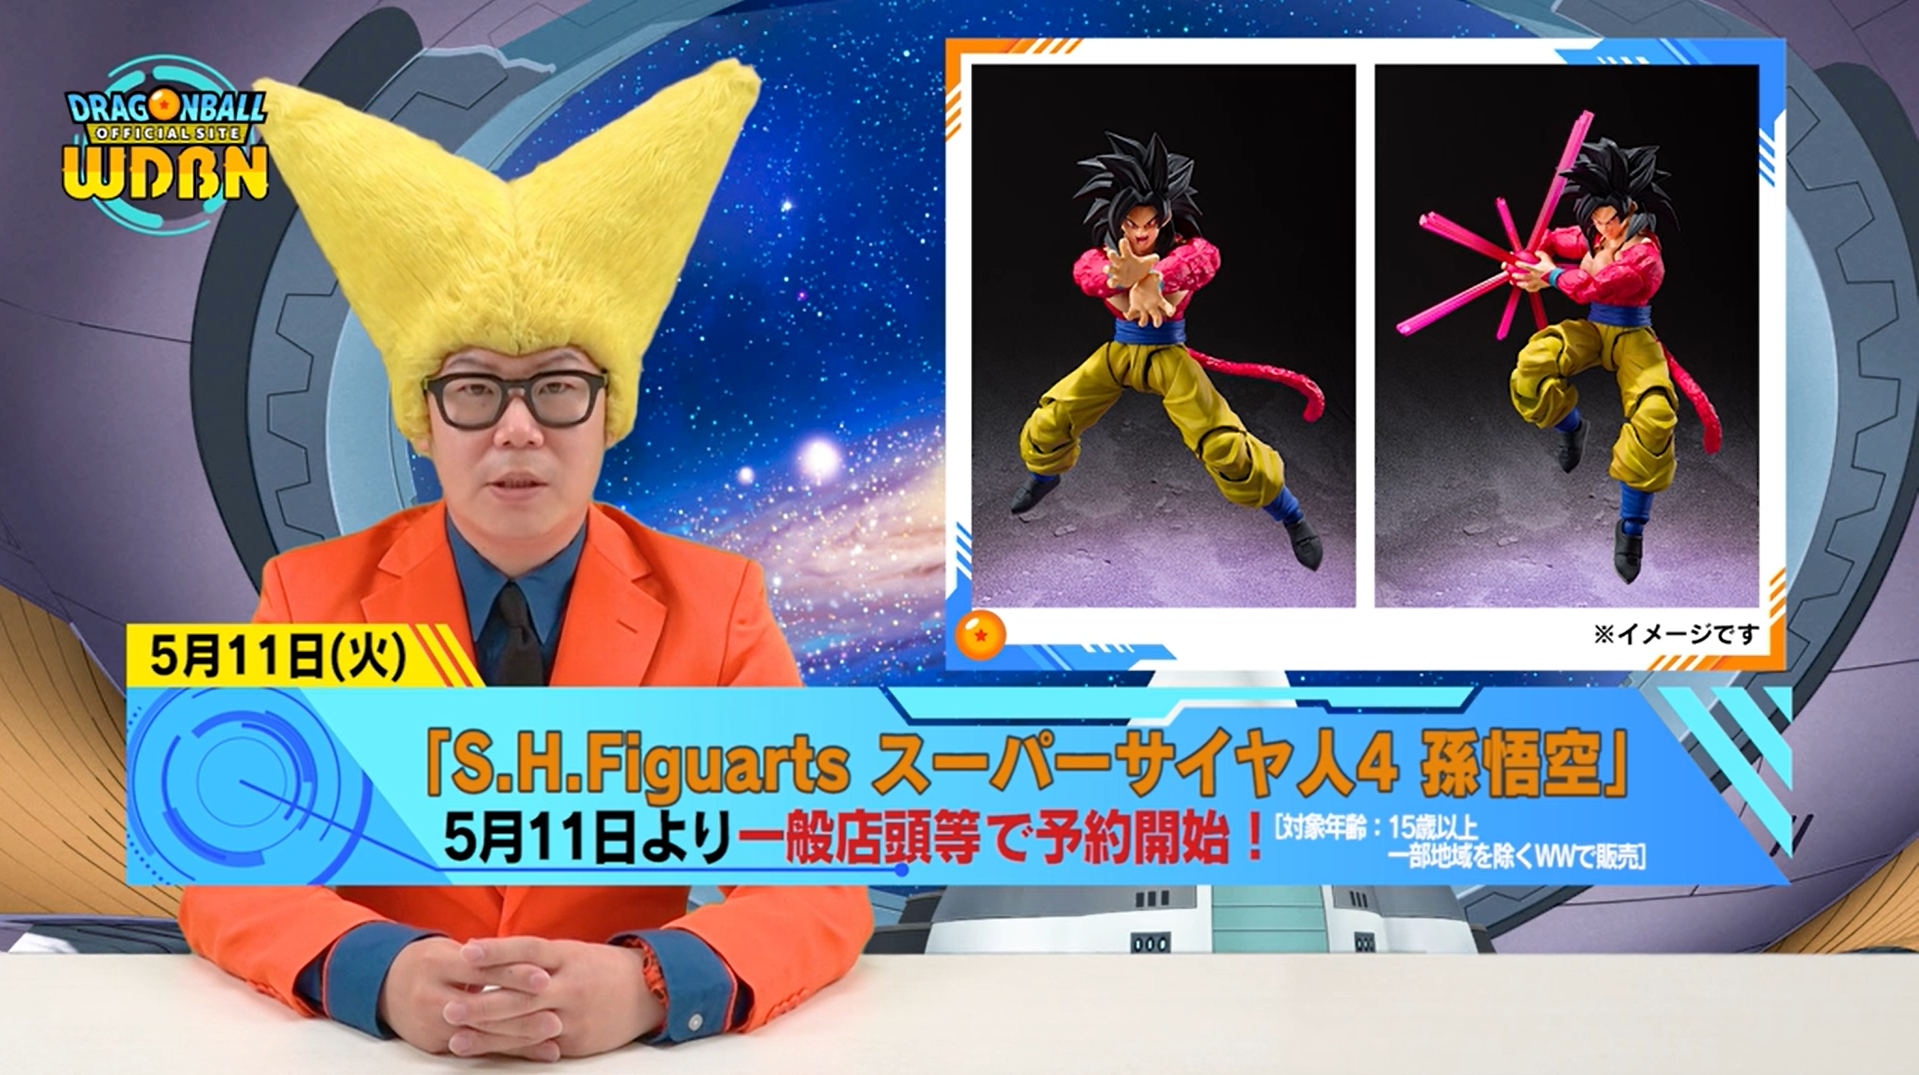 Highlights Dragonball Official Site